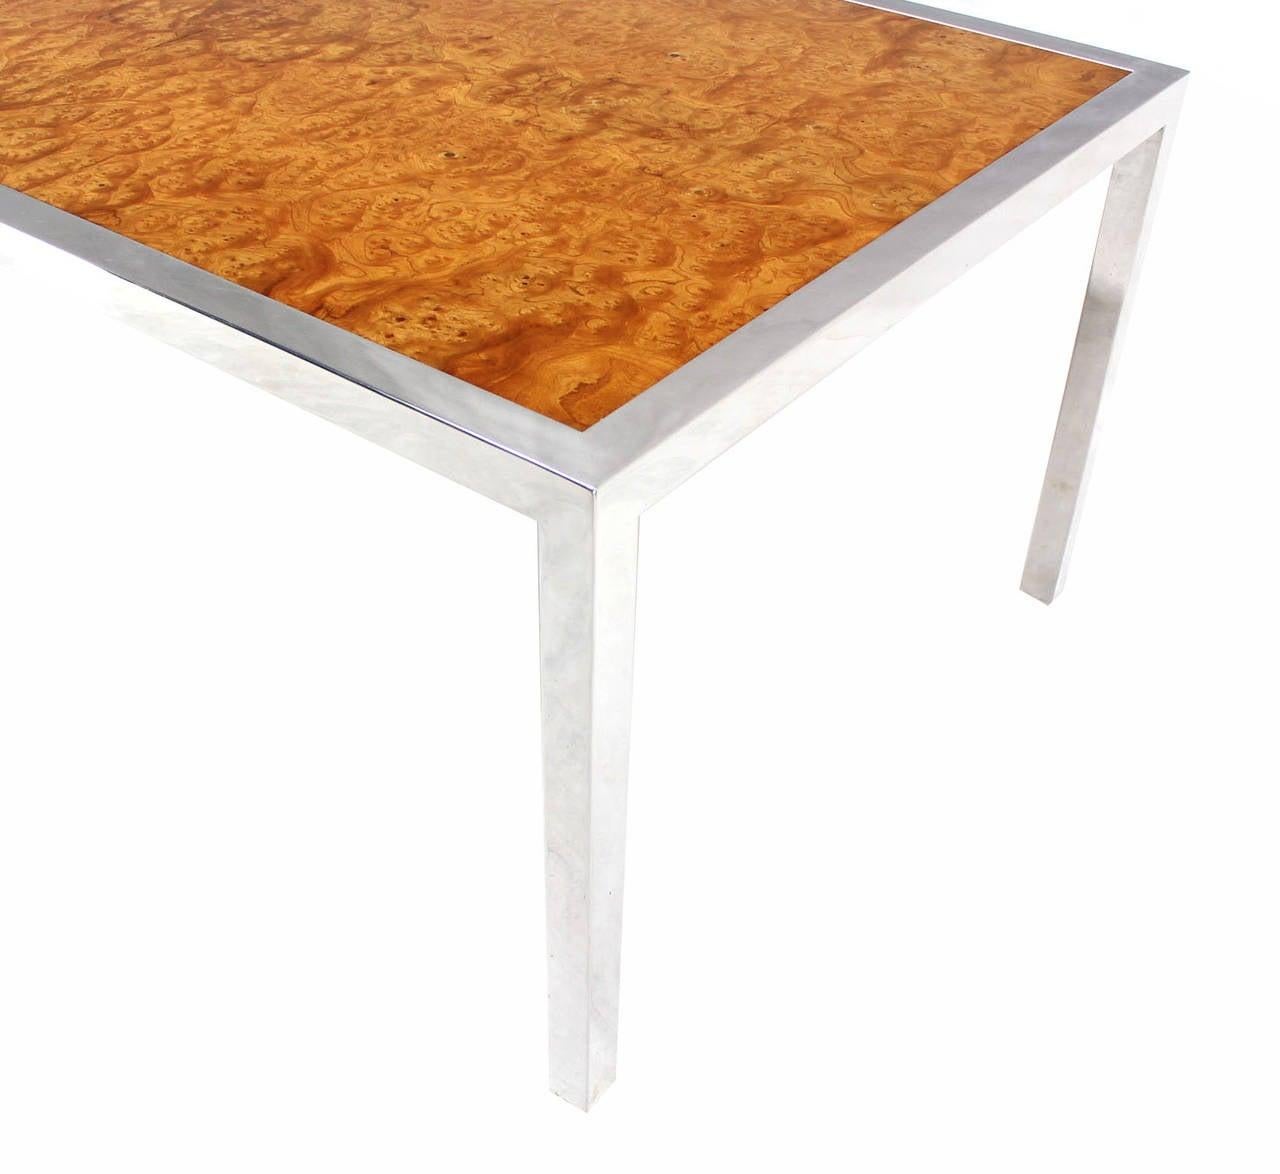 20th Century Stainless Steel Chrome Base Amber Burl Wood Dining Conference Table Two Leaves For Sale